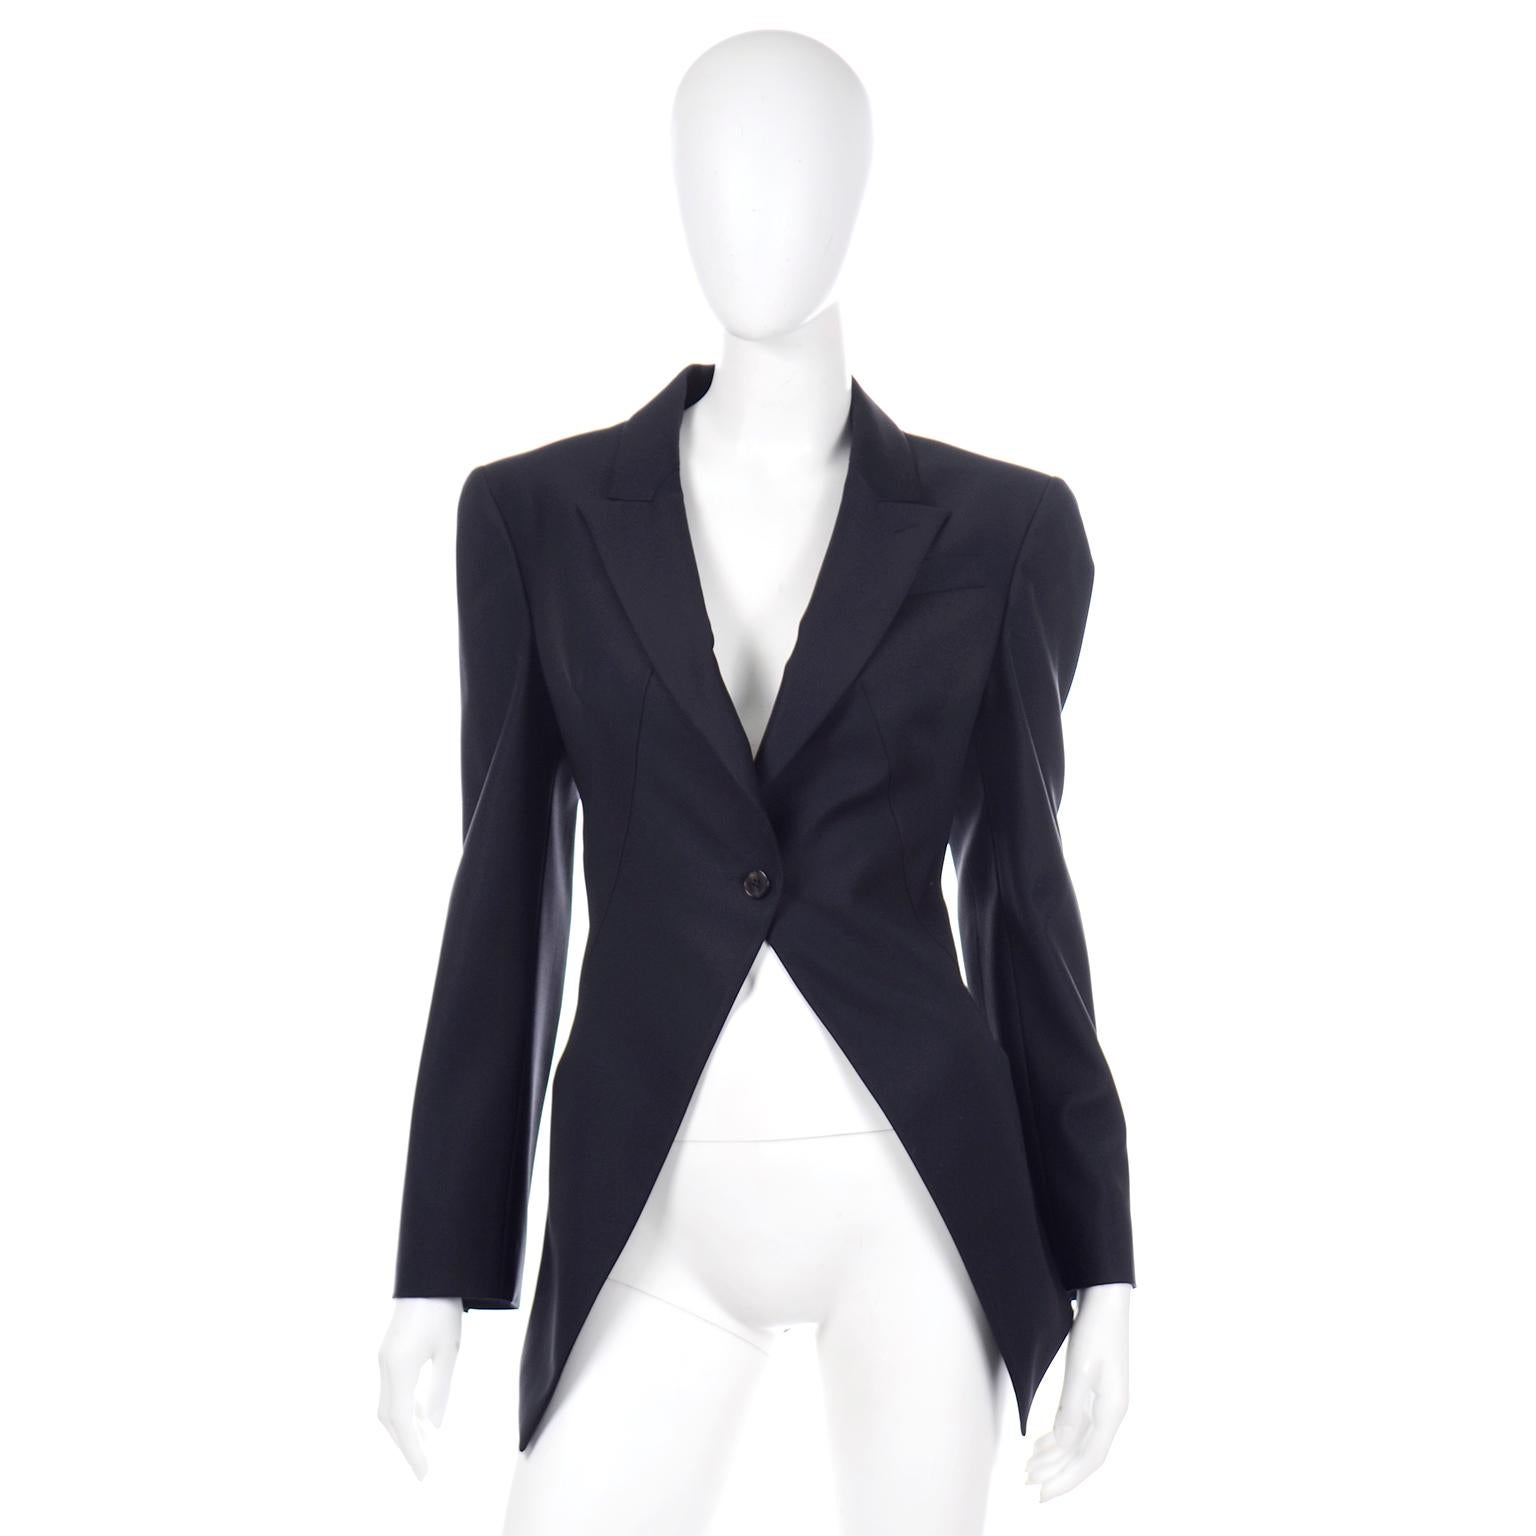 This is a 2011 vintage Alexander McQueen black wool cutaway tuxedo style blazer with pointed lapels. We love the tailoring in this beautiful jacket and can think of a million ways to style it with trousers, dresses or skirts! There is a single